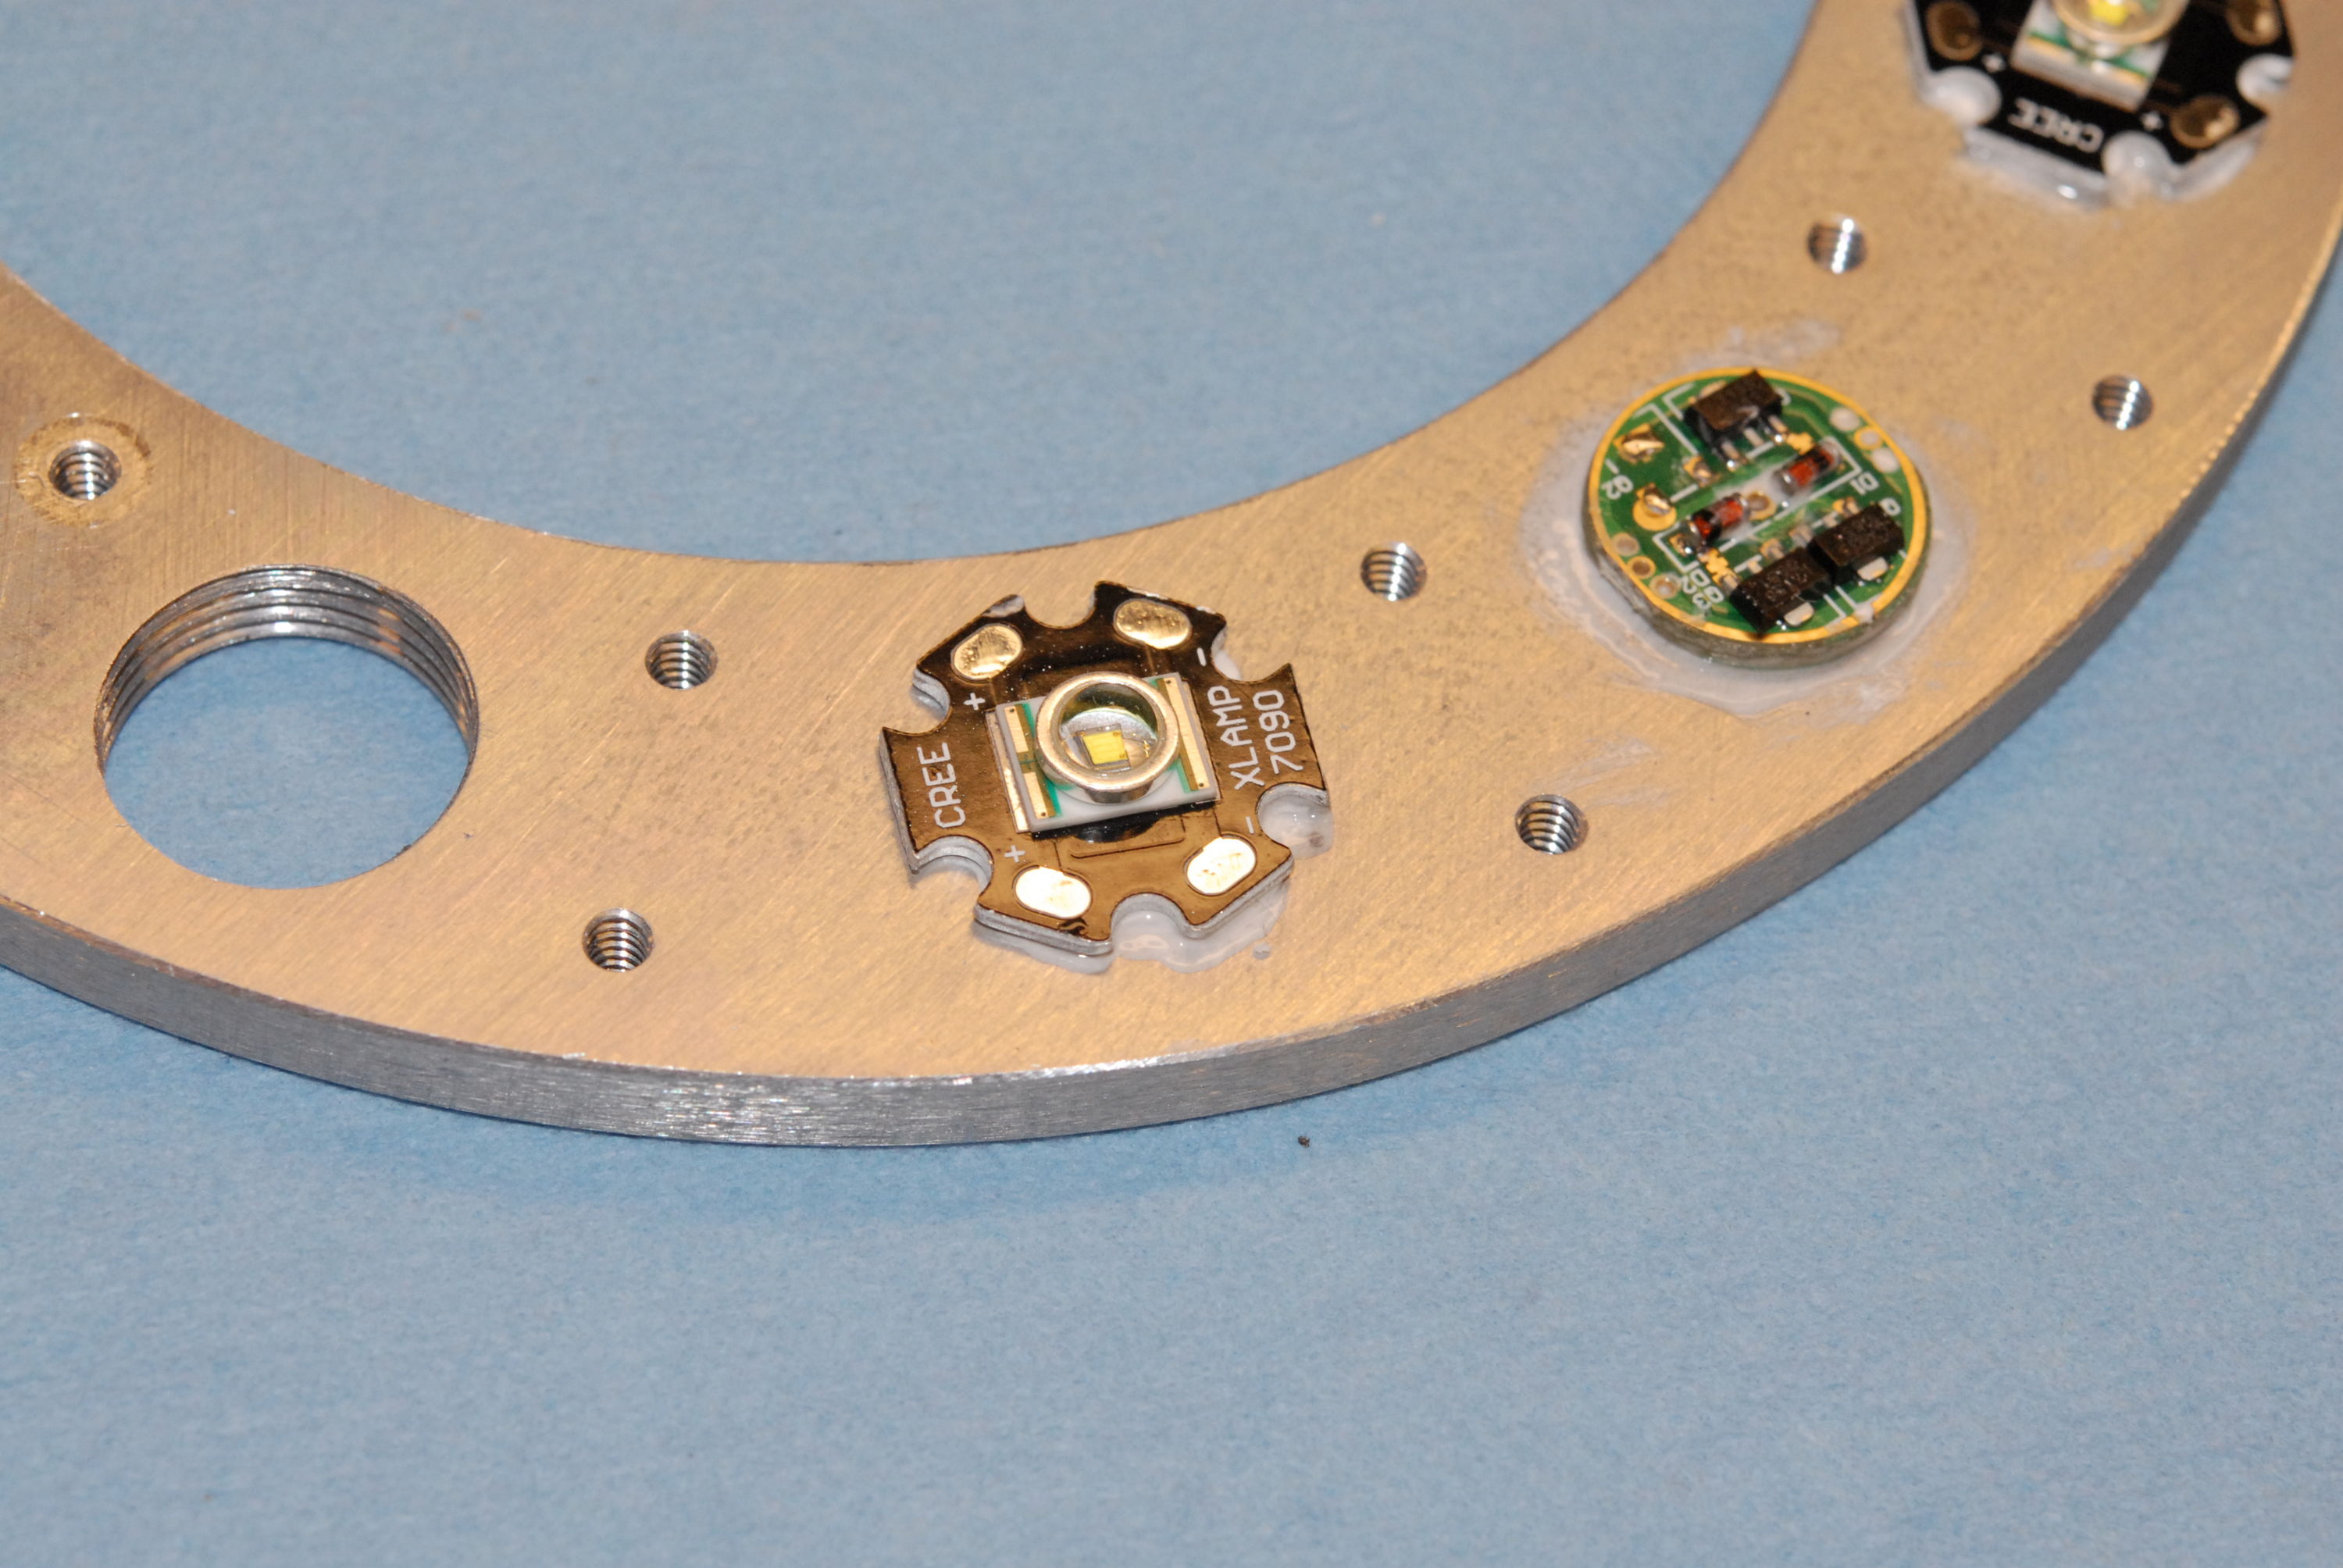 Backer ring with LED and regulator